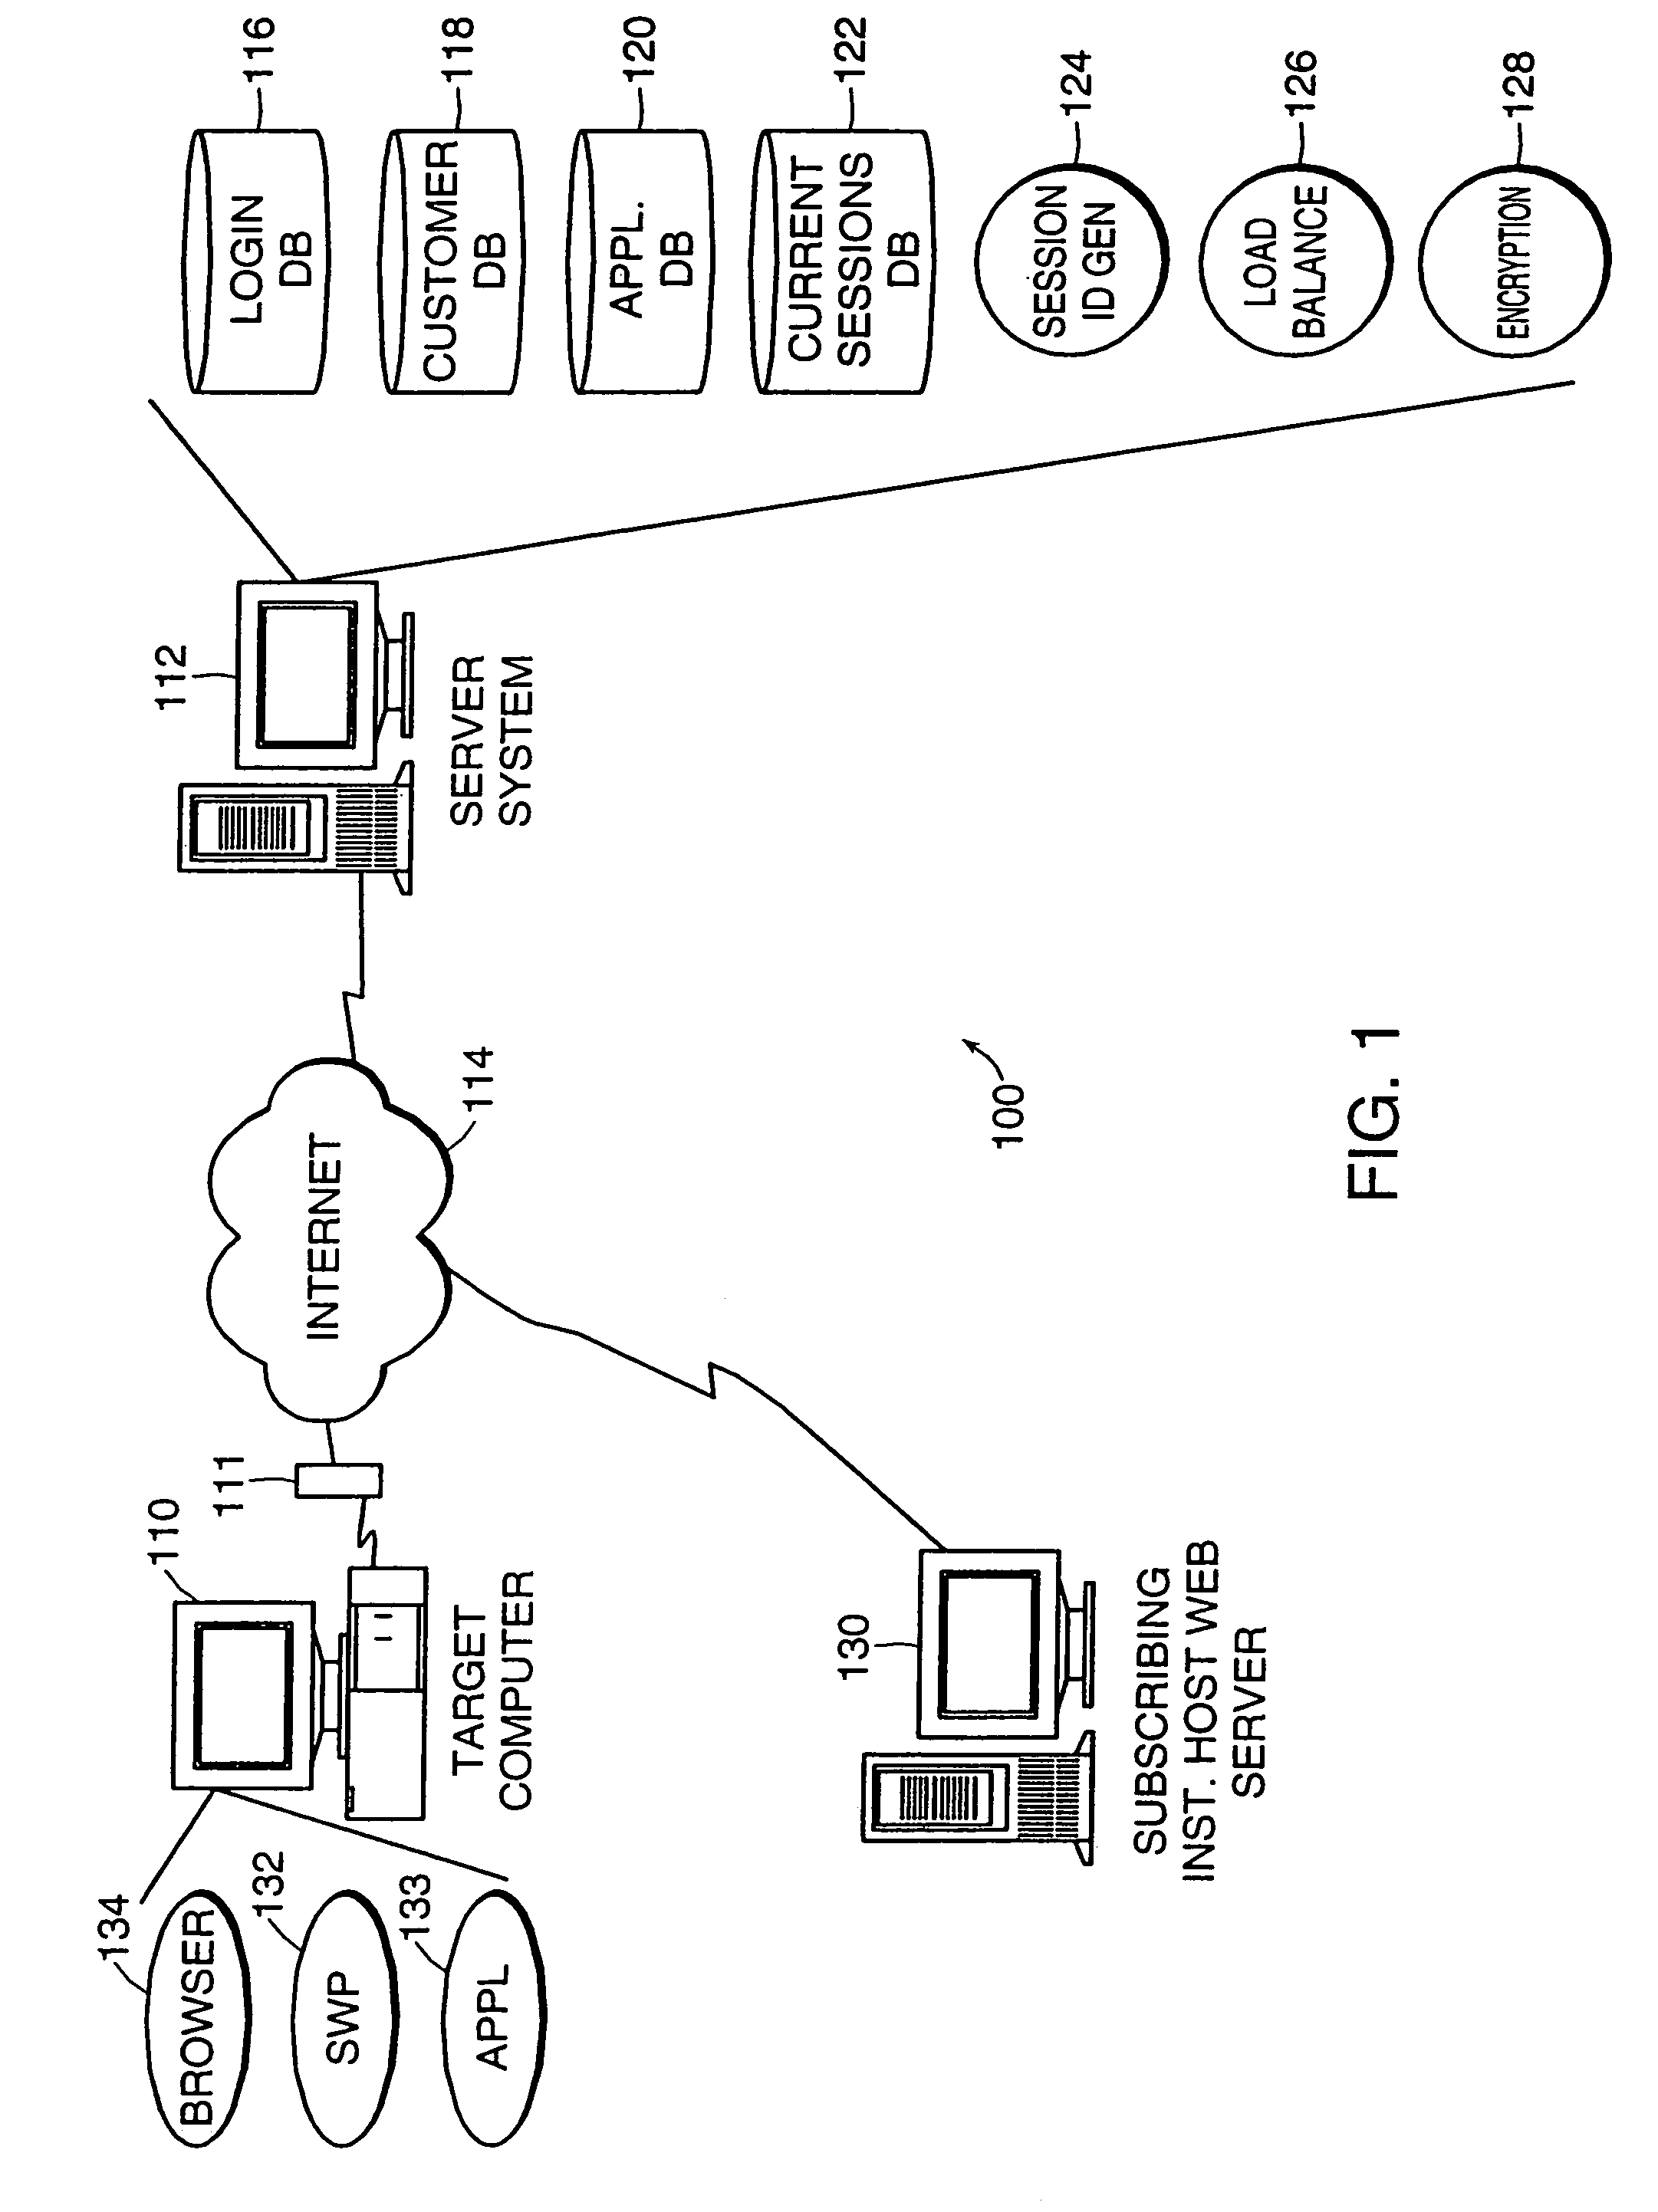 Method and system for serving software applications to client computers